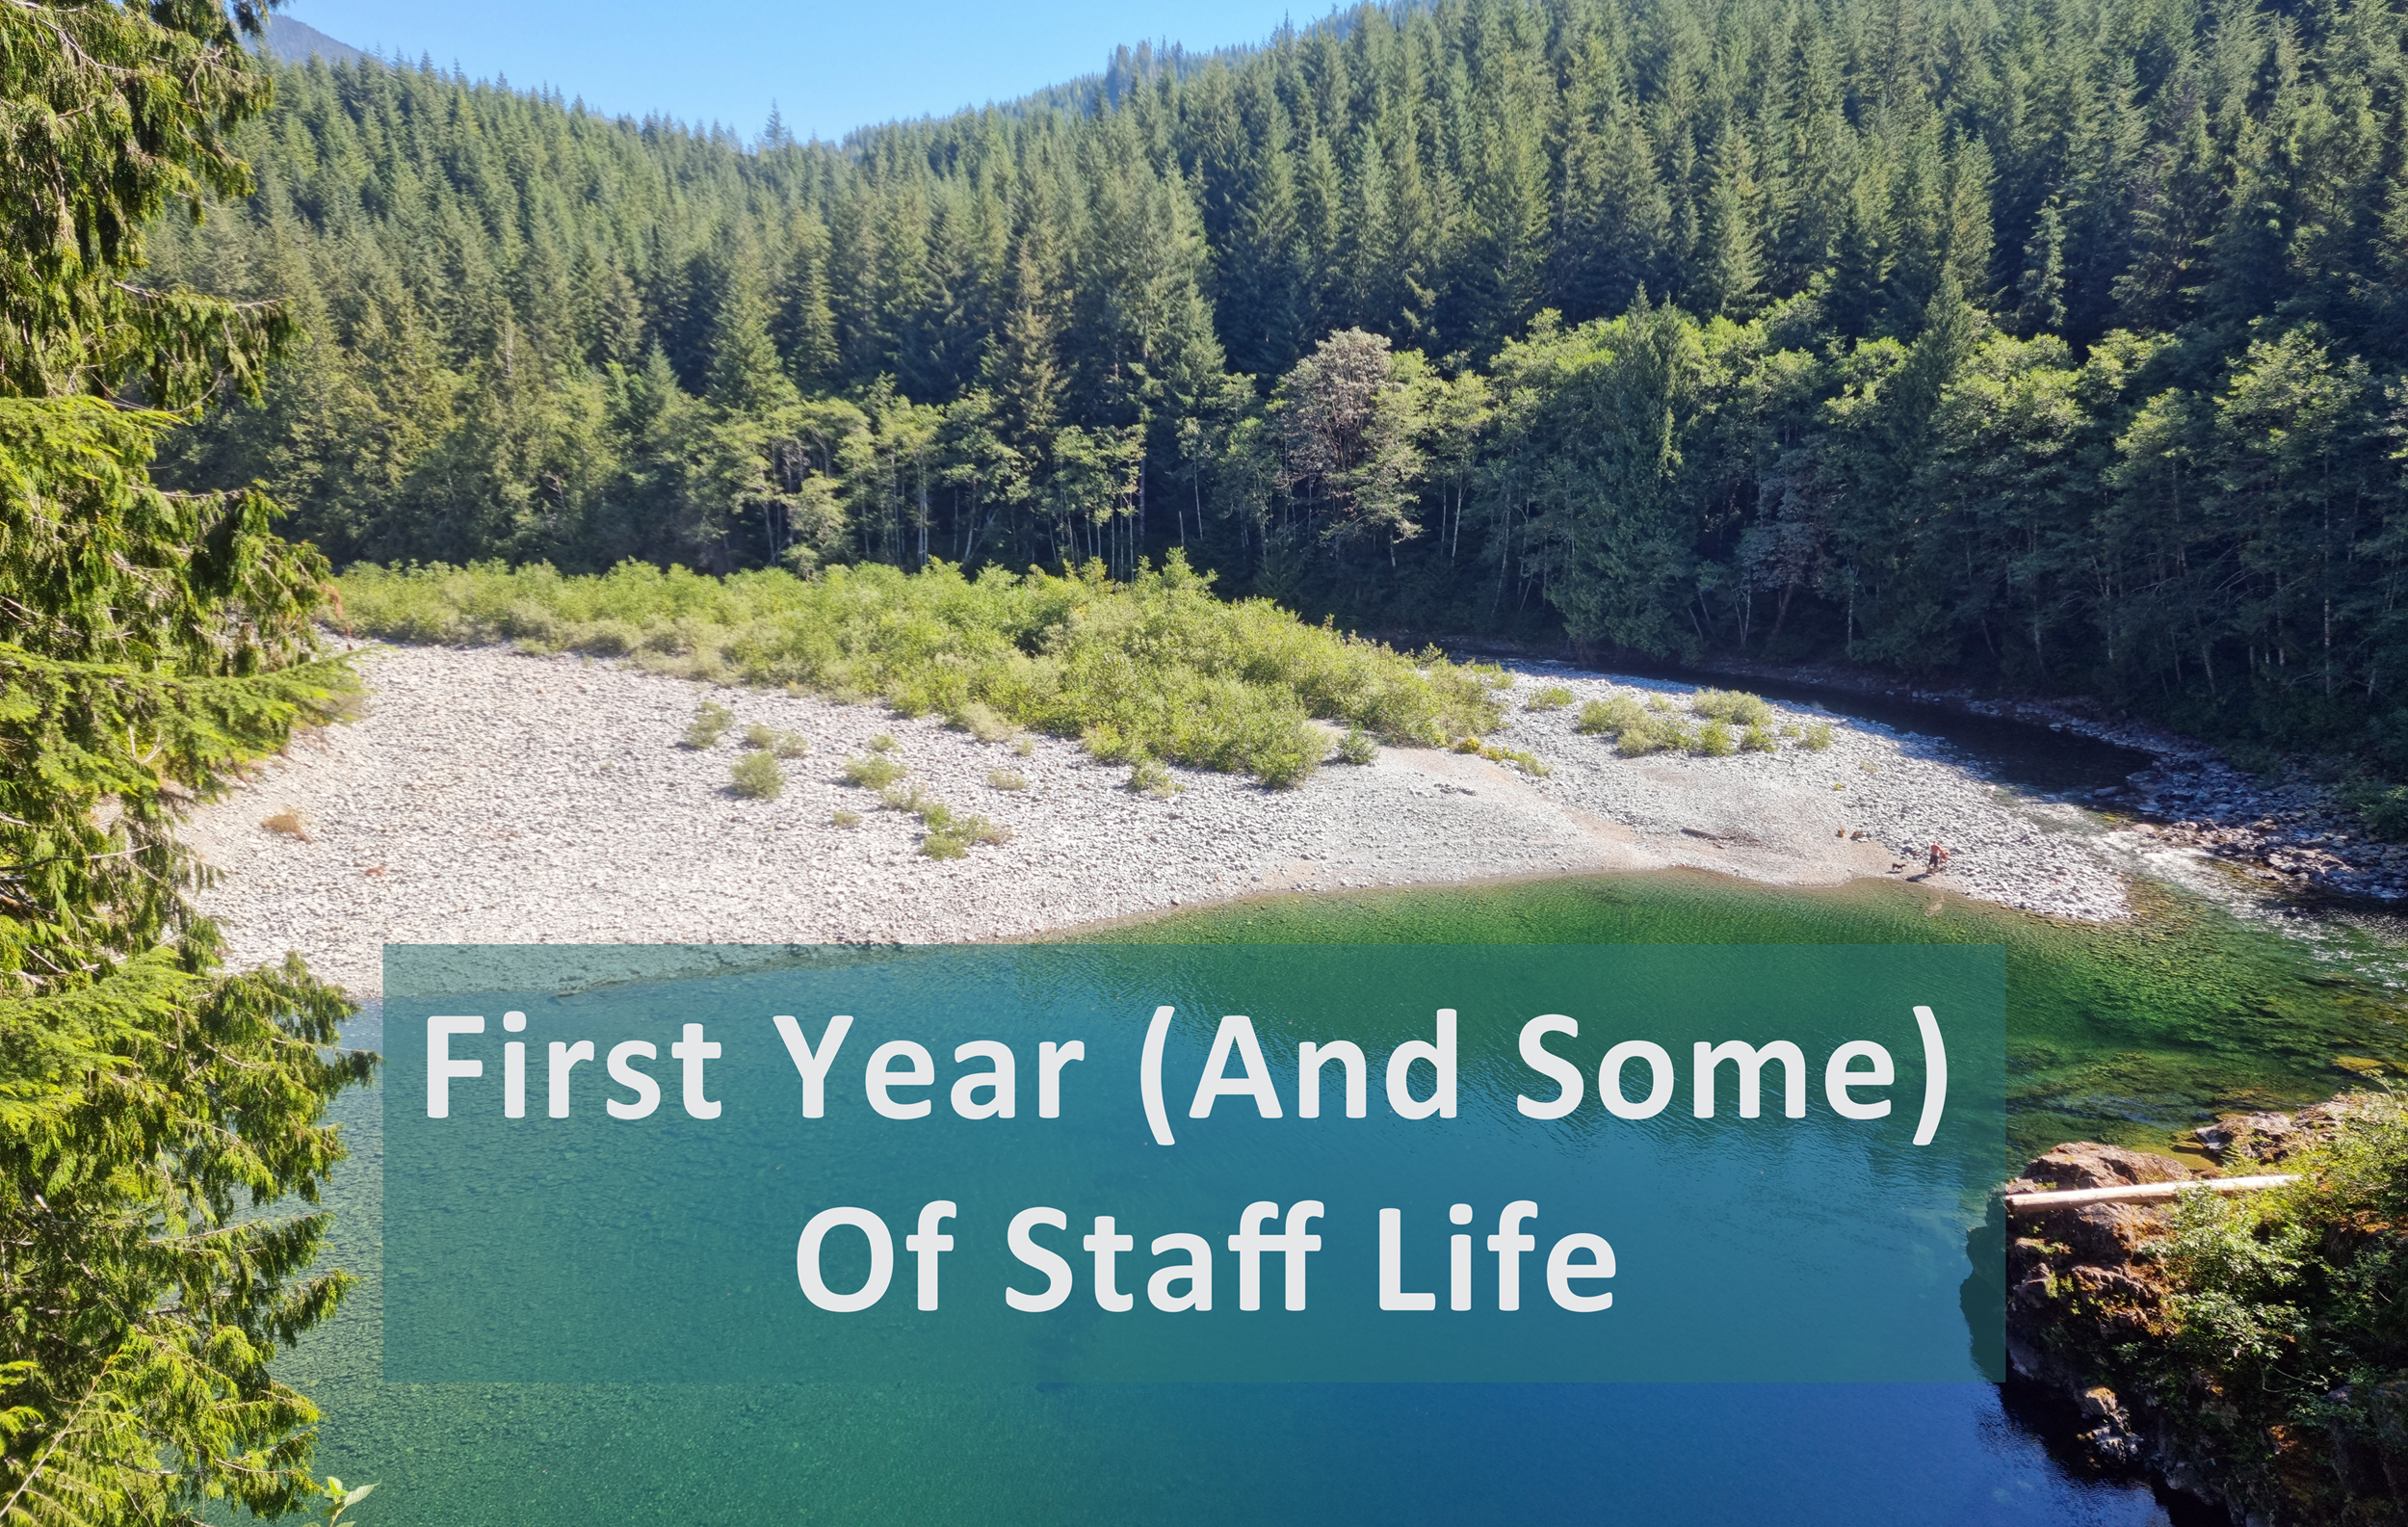 You are currently viewing The First Year (And Some) of Staff Life